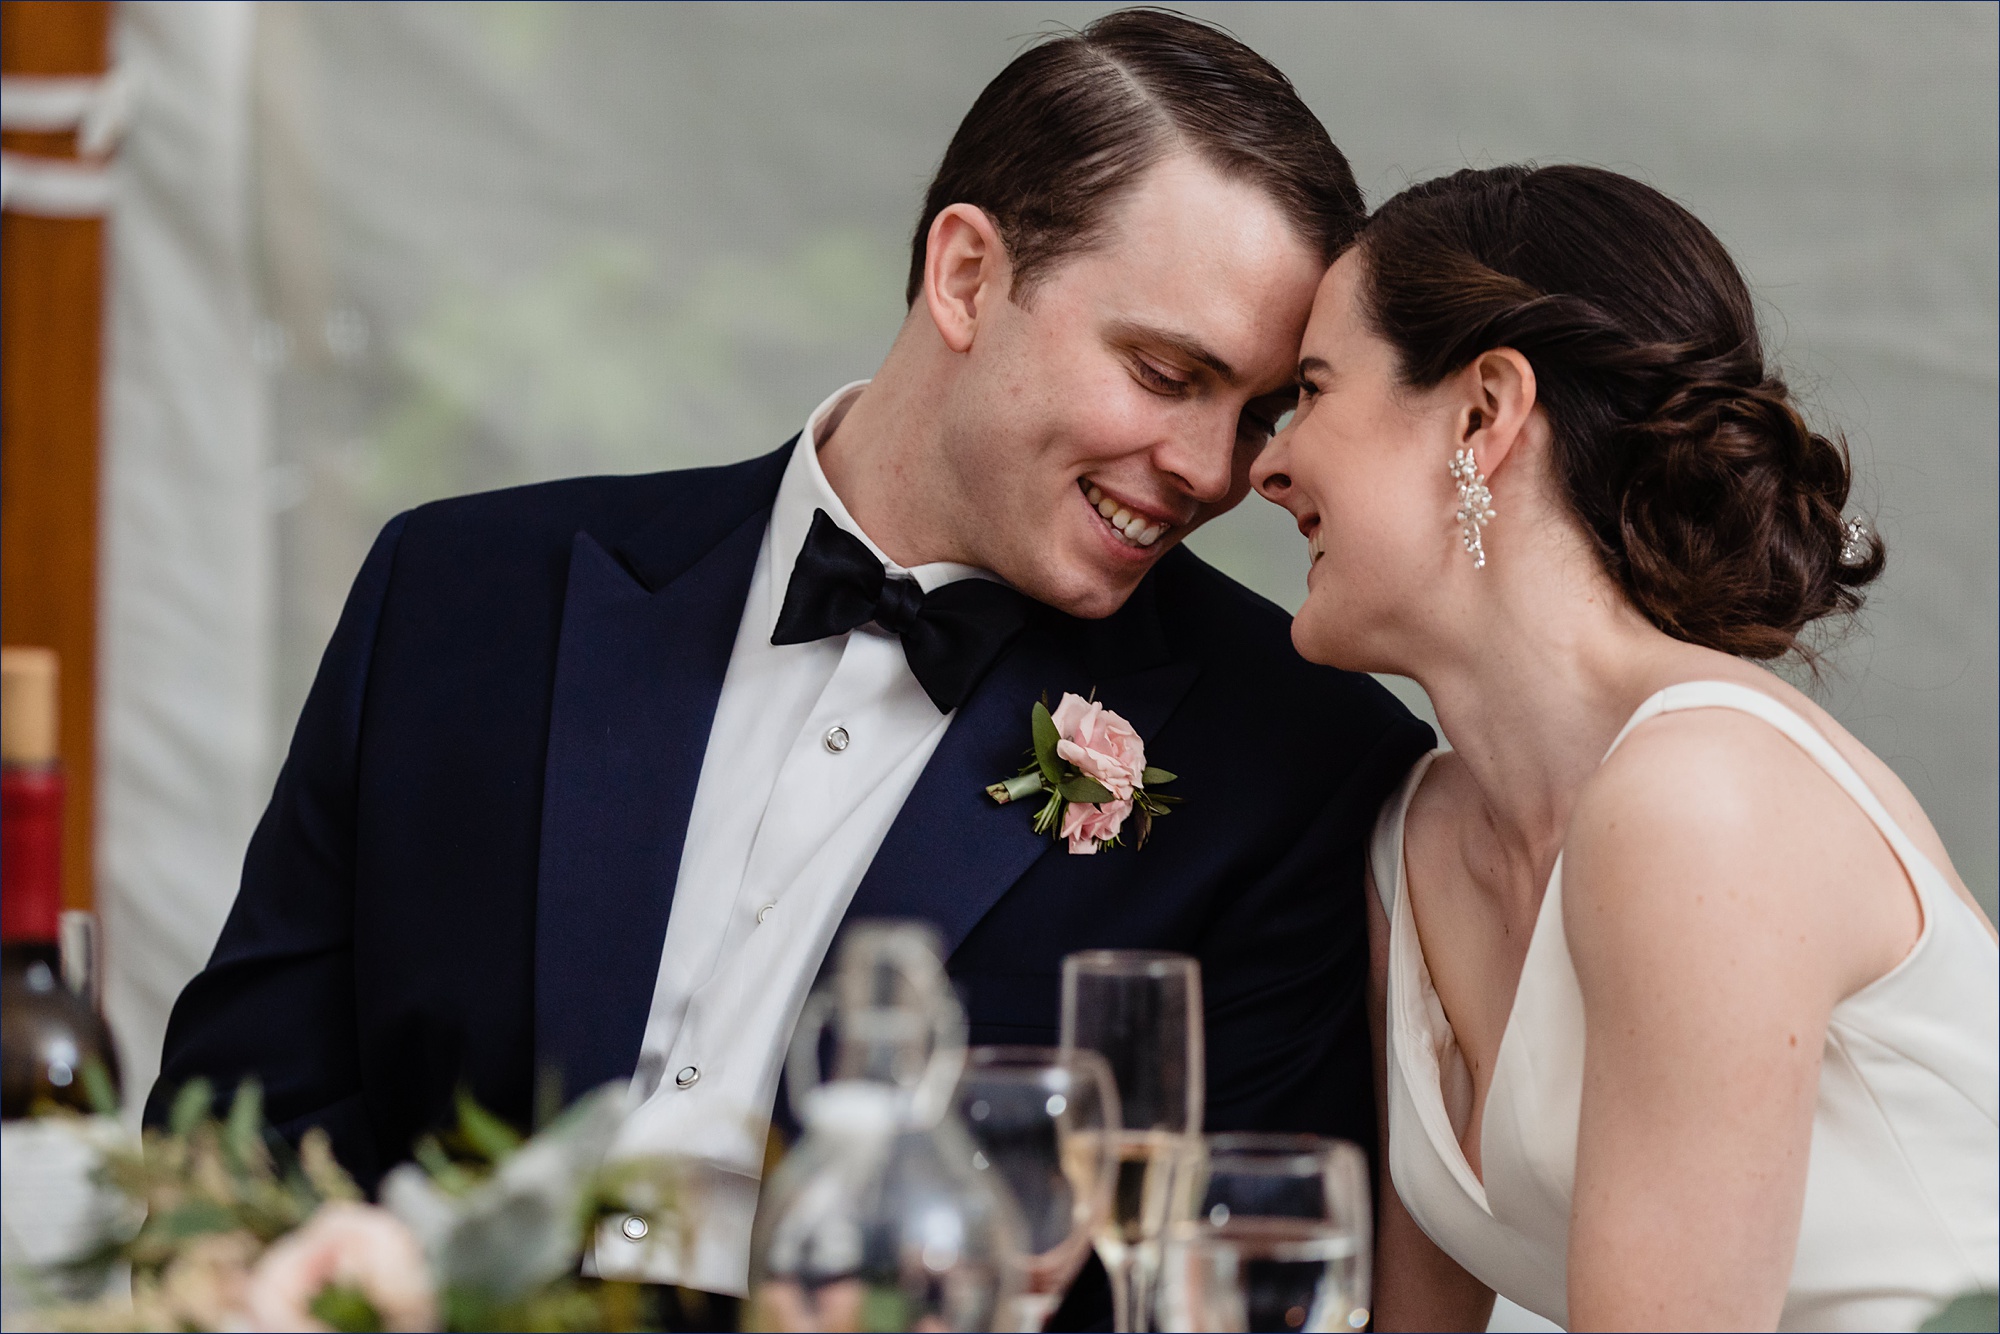 The bride and groom laugh during the toasts at their Maine wedding reception